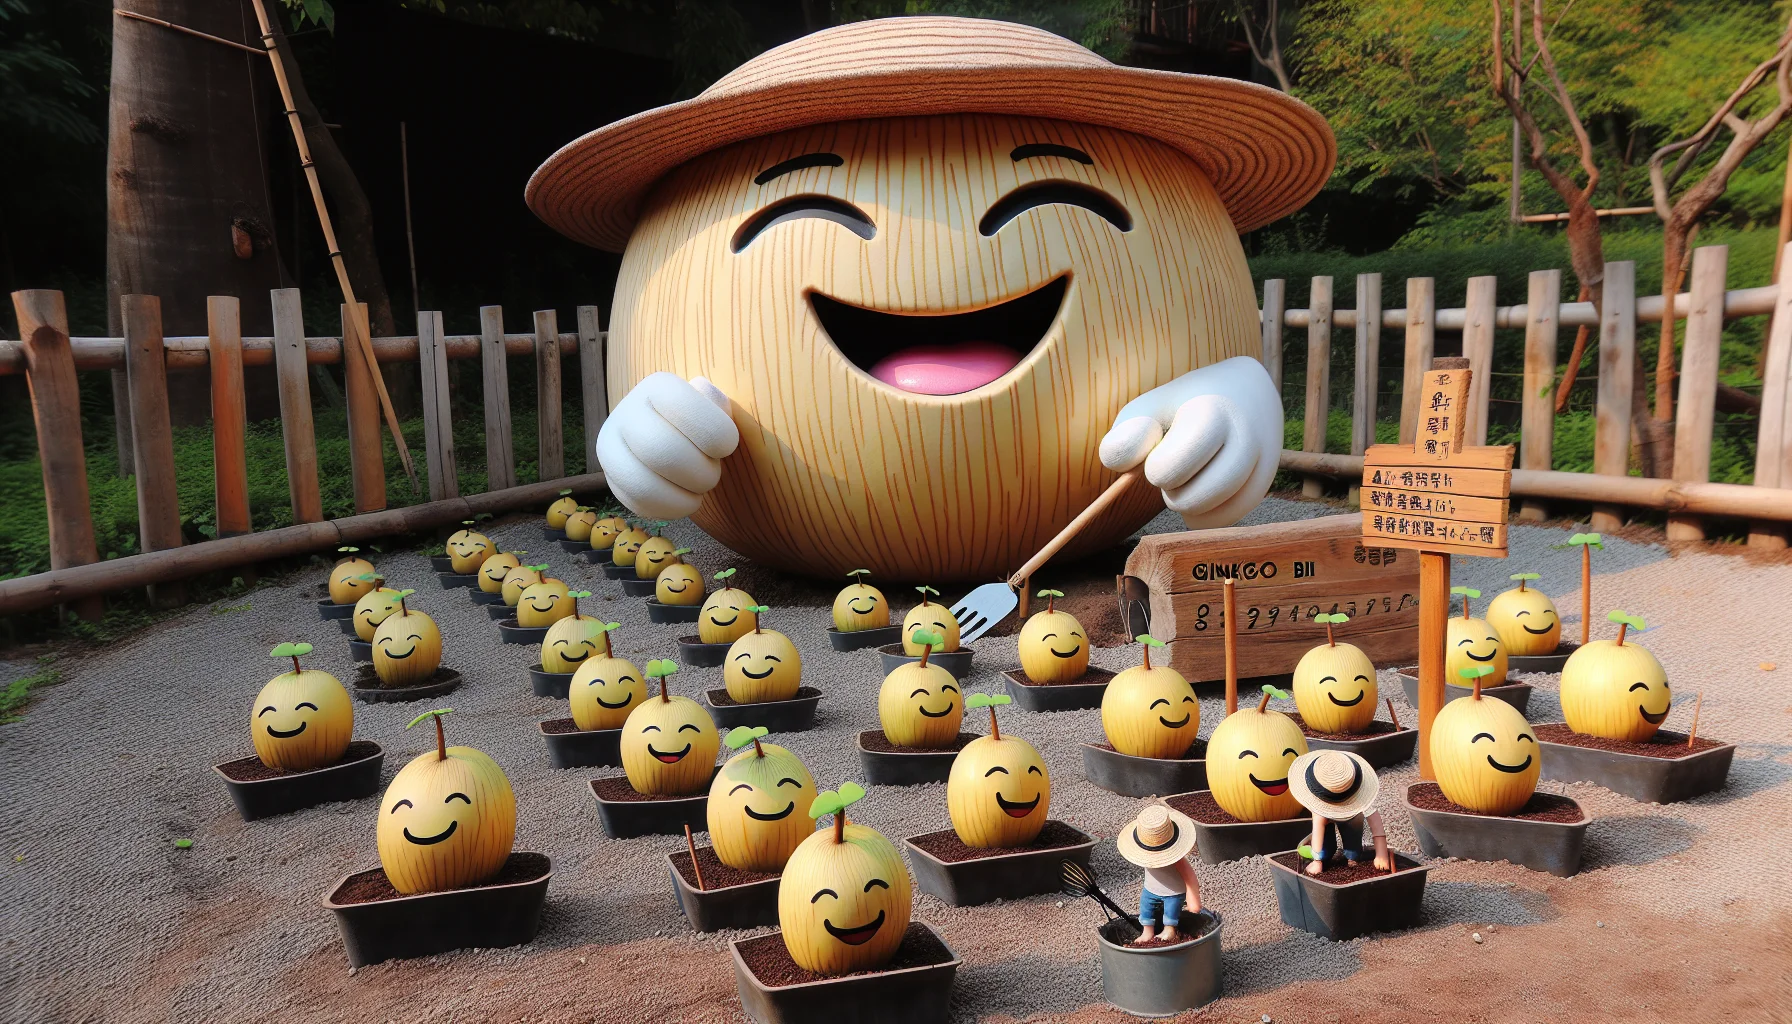 Create a visual representation of a whimsical garden scene starring ginkgo biloba fruits. In the image, a giant ginkgo biloba fruit, with a wide, beaming smile painted on it, is enthusiastically tending to smaller ginkgo biloba fruits lined up in rows like seedlings. The small fruits are brought to life with tiny arms and legs, some wearing straw hats or sunglasses, seemingly enjoying the sunny day. A wooden signboard anchored in the corner of the garden reads, 'Ginkgo Biloba: The Joy of Gardening!'. An atmosphere of fun, laughter and care for plants pervades the scene, encouraging viewers to appreciate gardening.